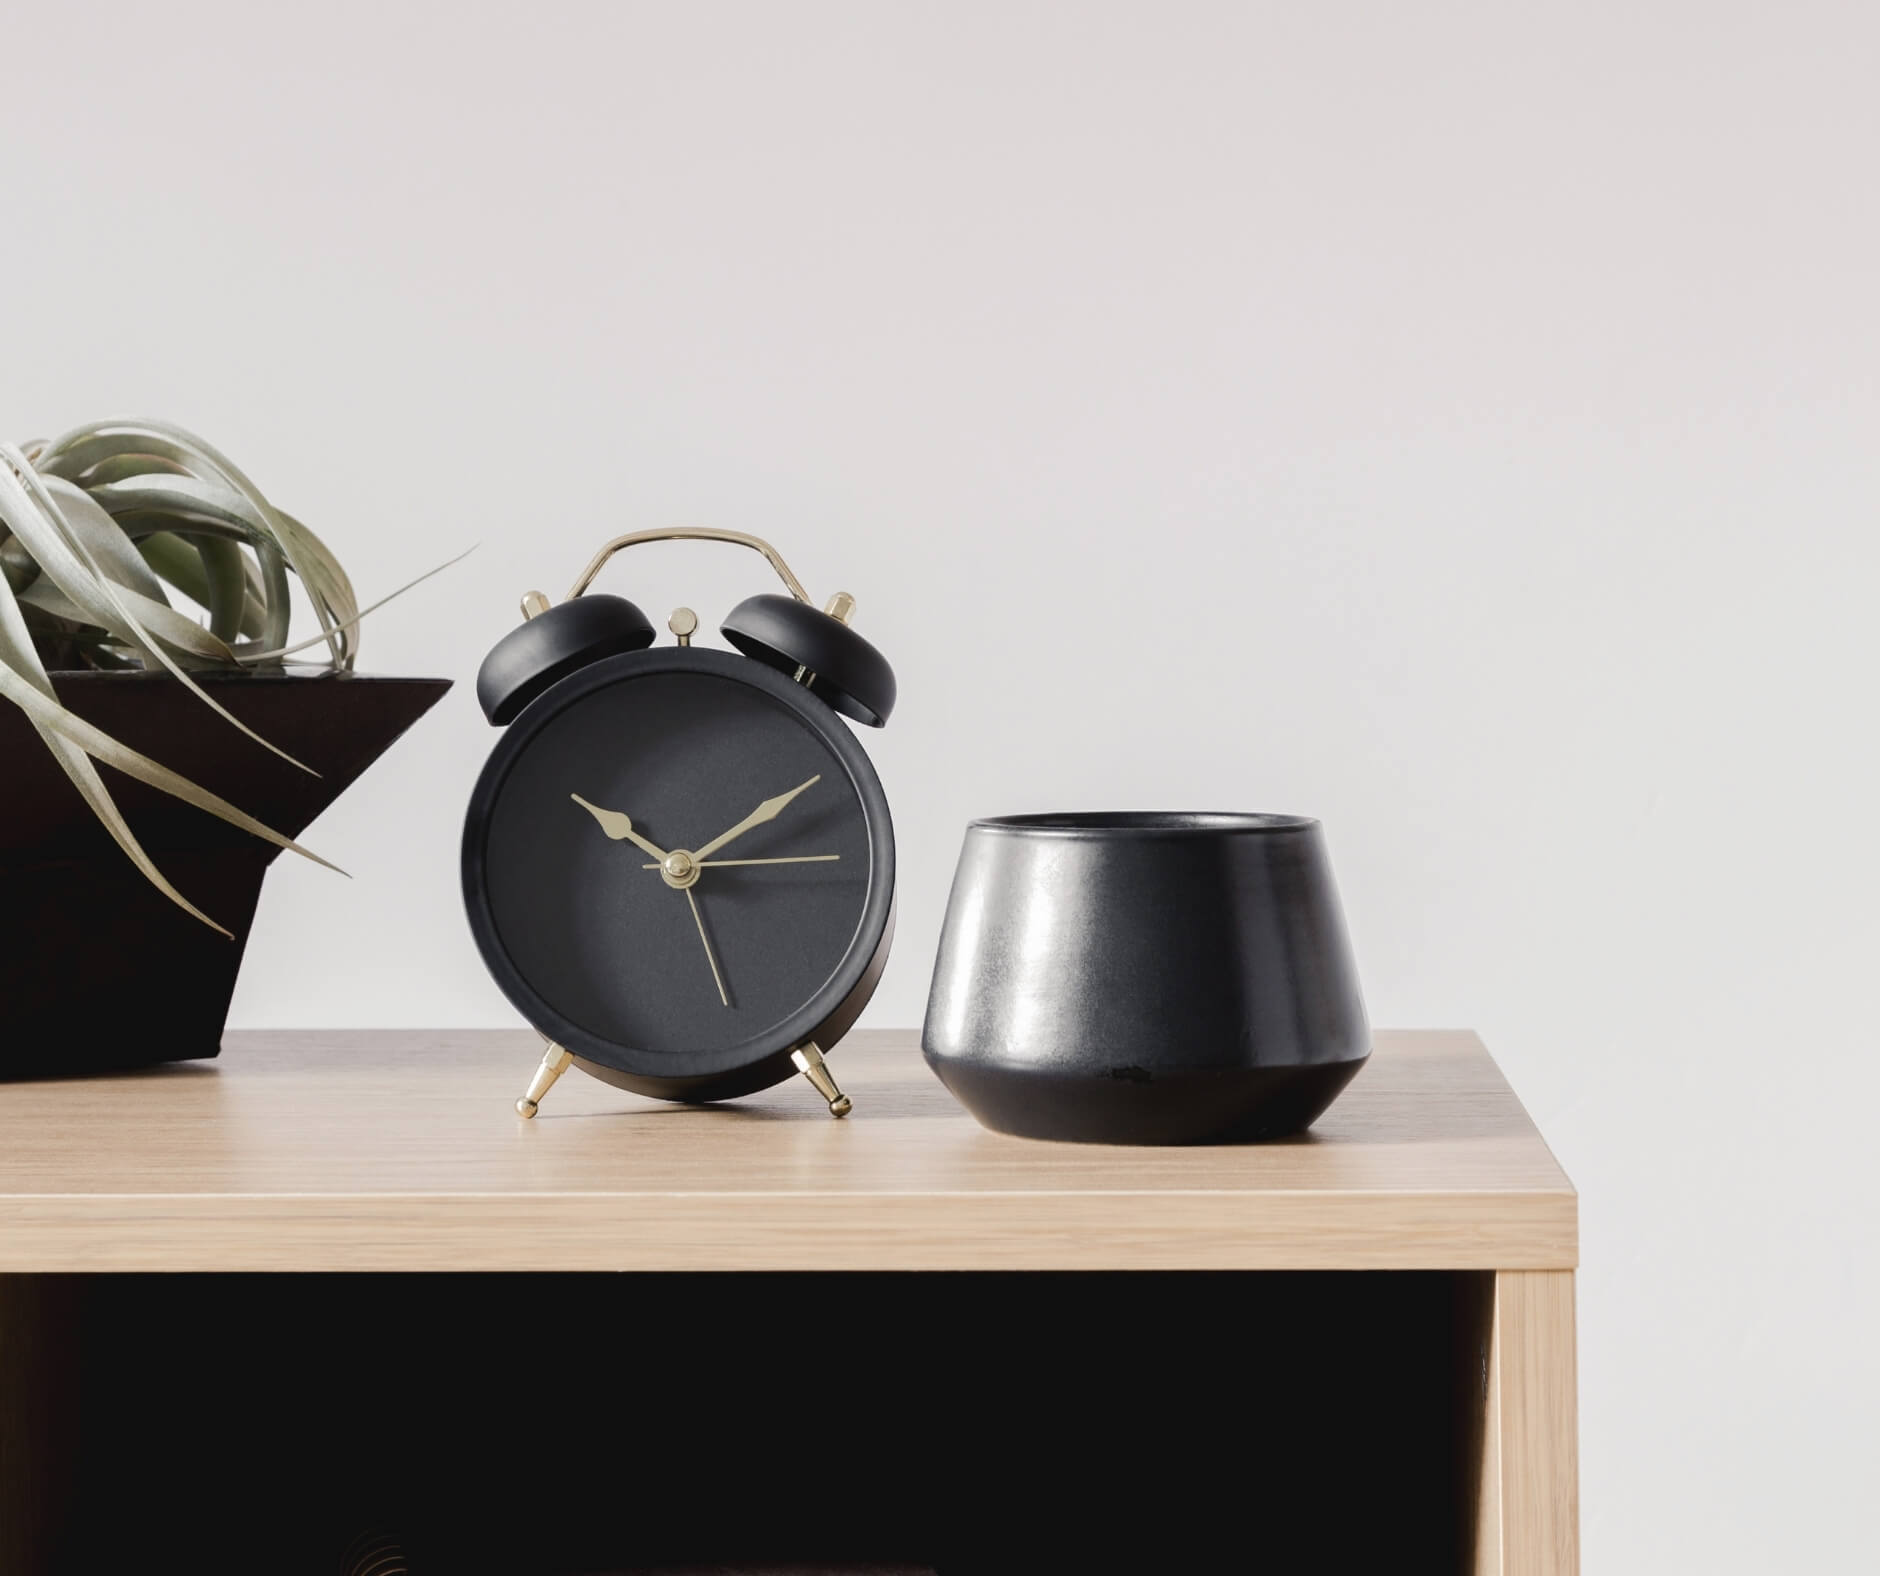 Analog alarm clock and a small plant in a pot on a wooden shelf against a neutral background, showcasing Elliot Olson's website design strategy.